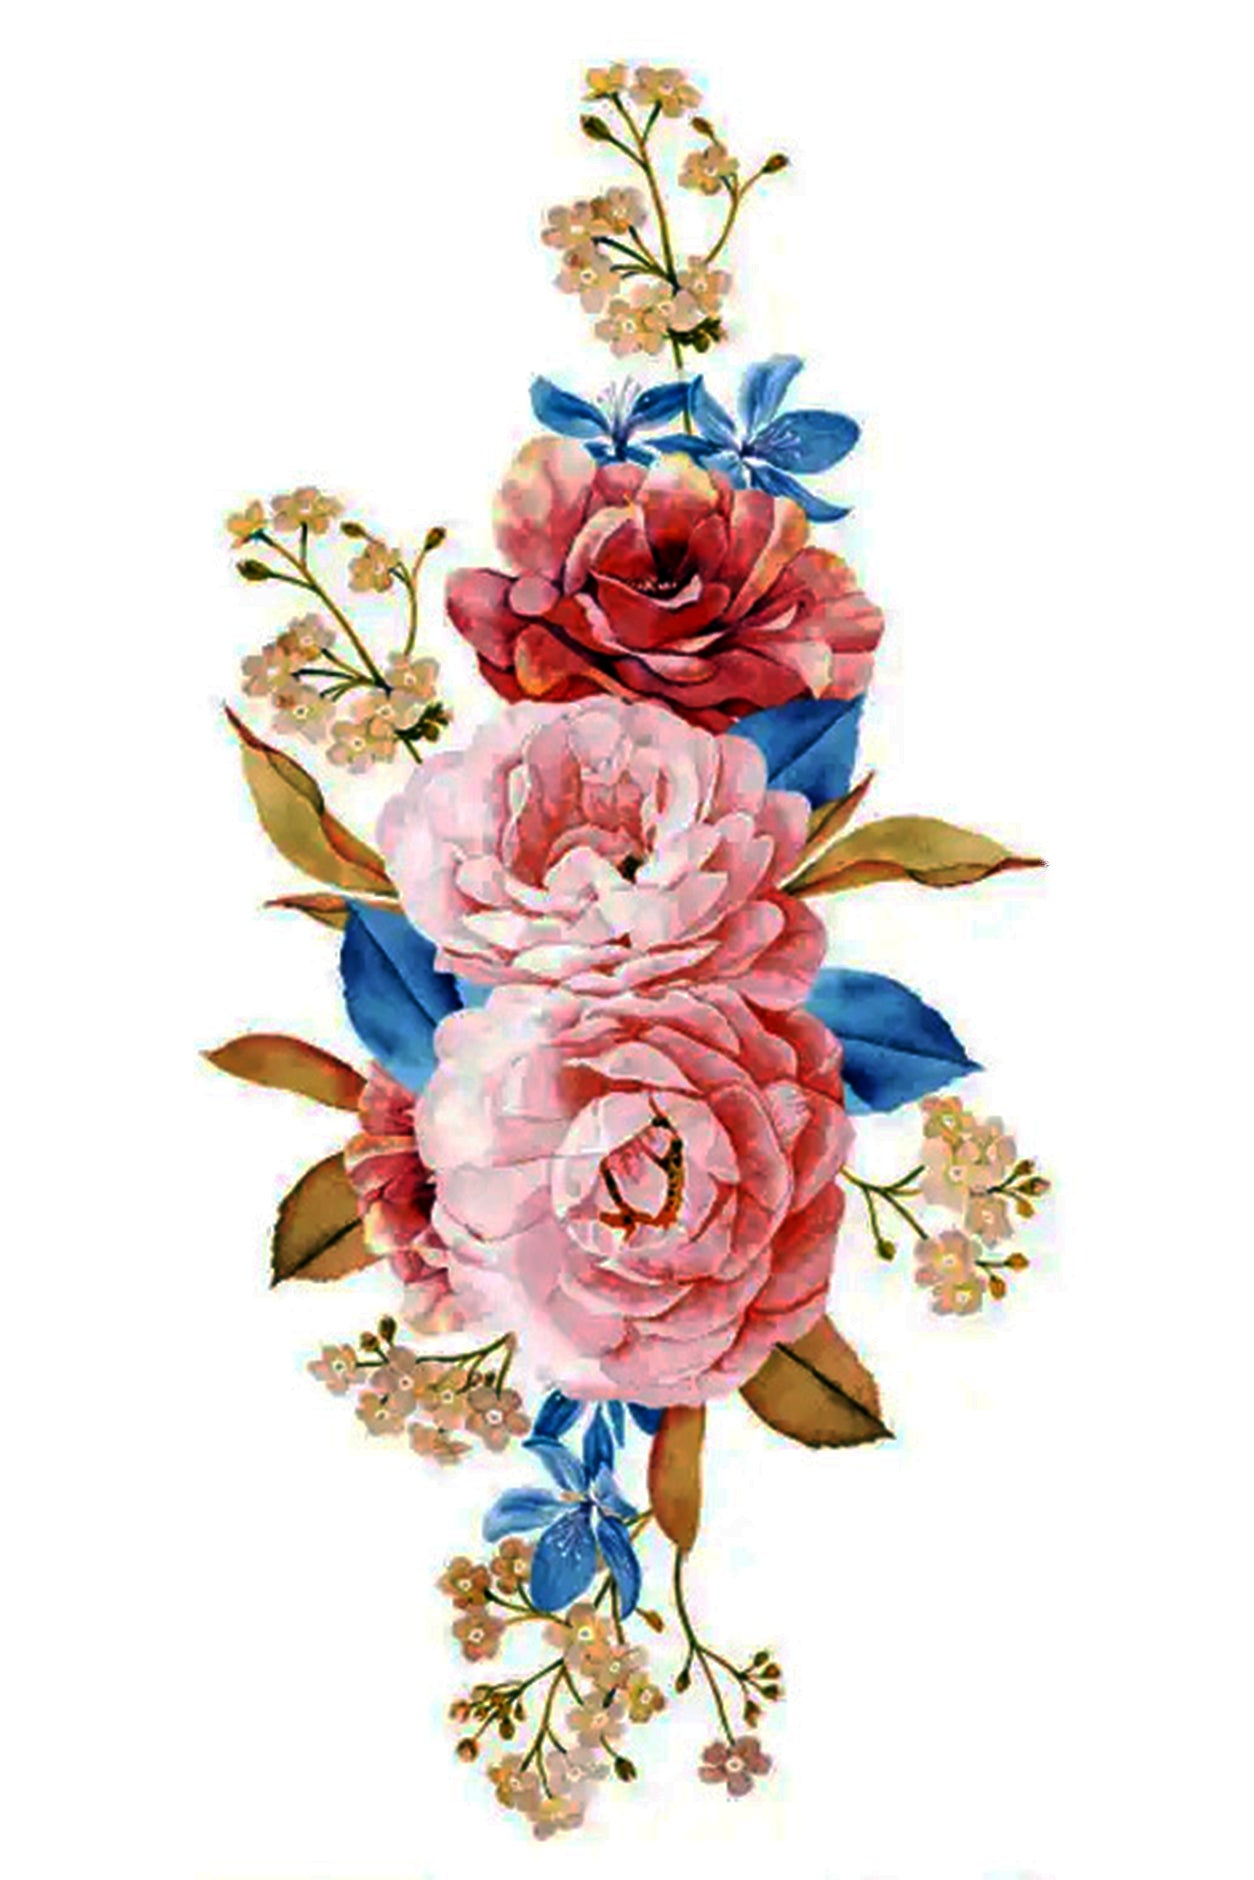 A feminine bouquet of three pastel pink full roses framed by soft baby's breath and pale blue leaves. The tattoo complements any outfit and can be worn for a day or up to 14 days. The bouquet is cheerful, vivid, and uber-trendy.  Creatively wear this artwork on any part of your body, arm, leg, torso, or shoulder.